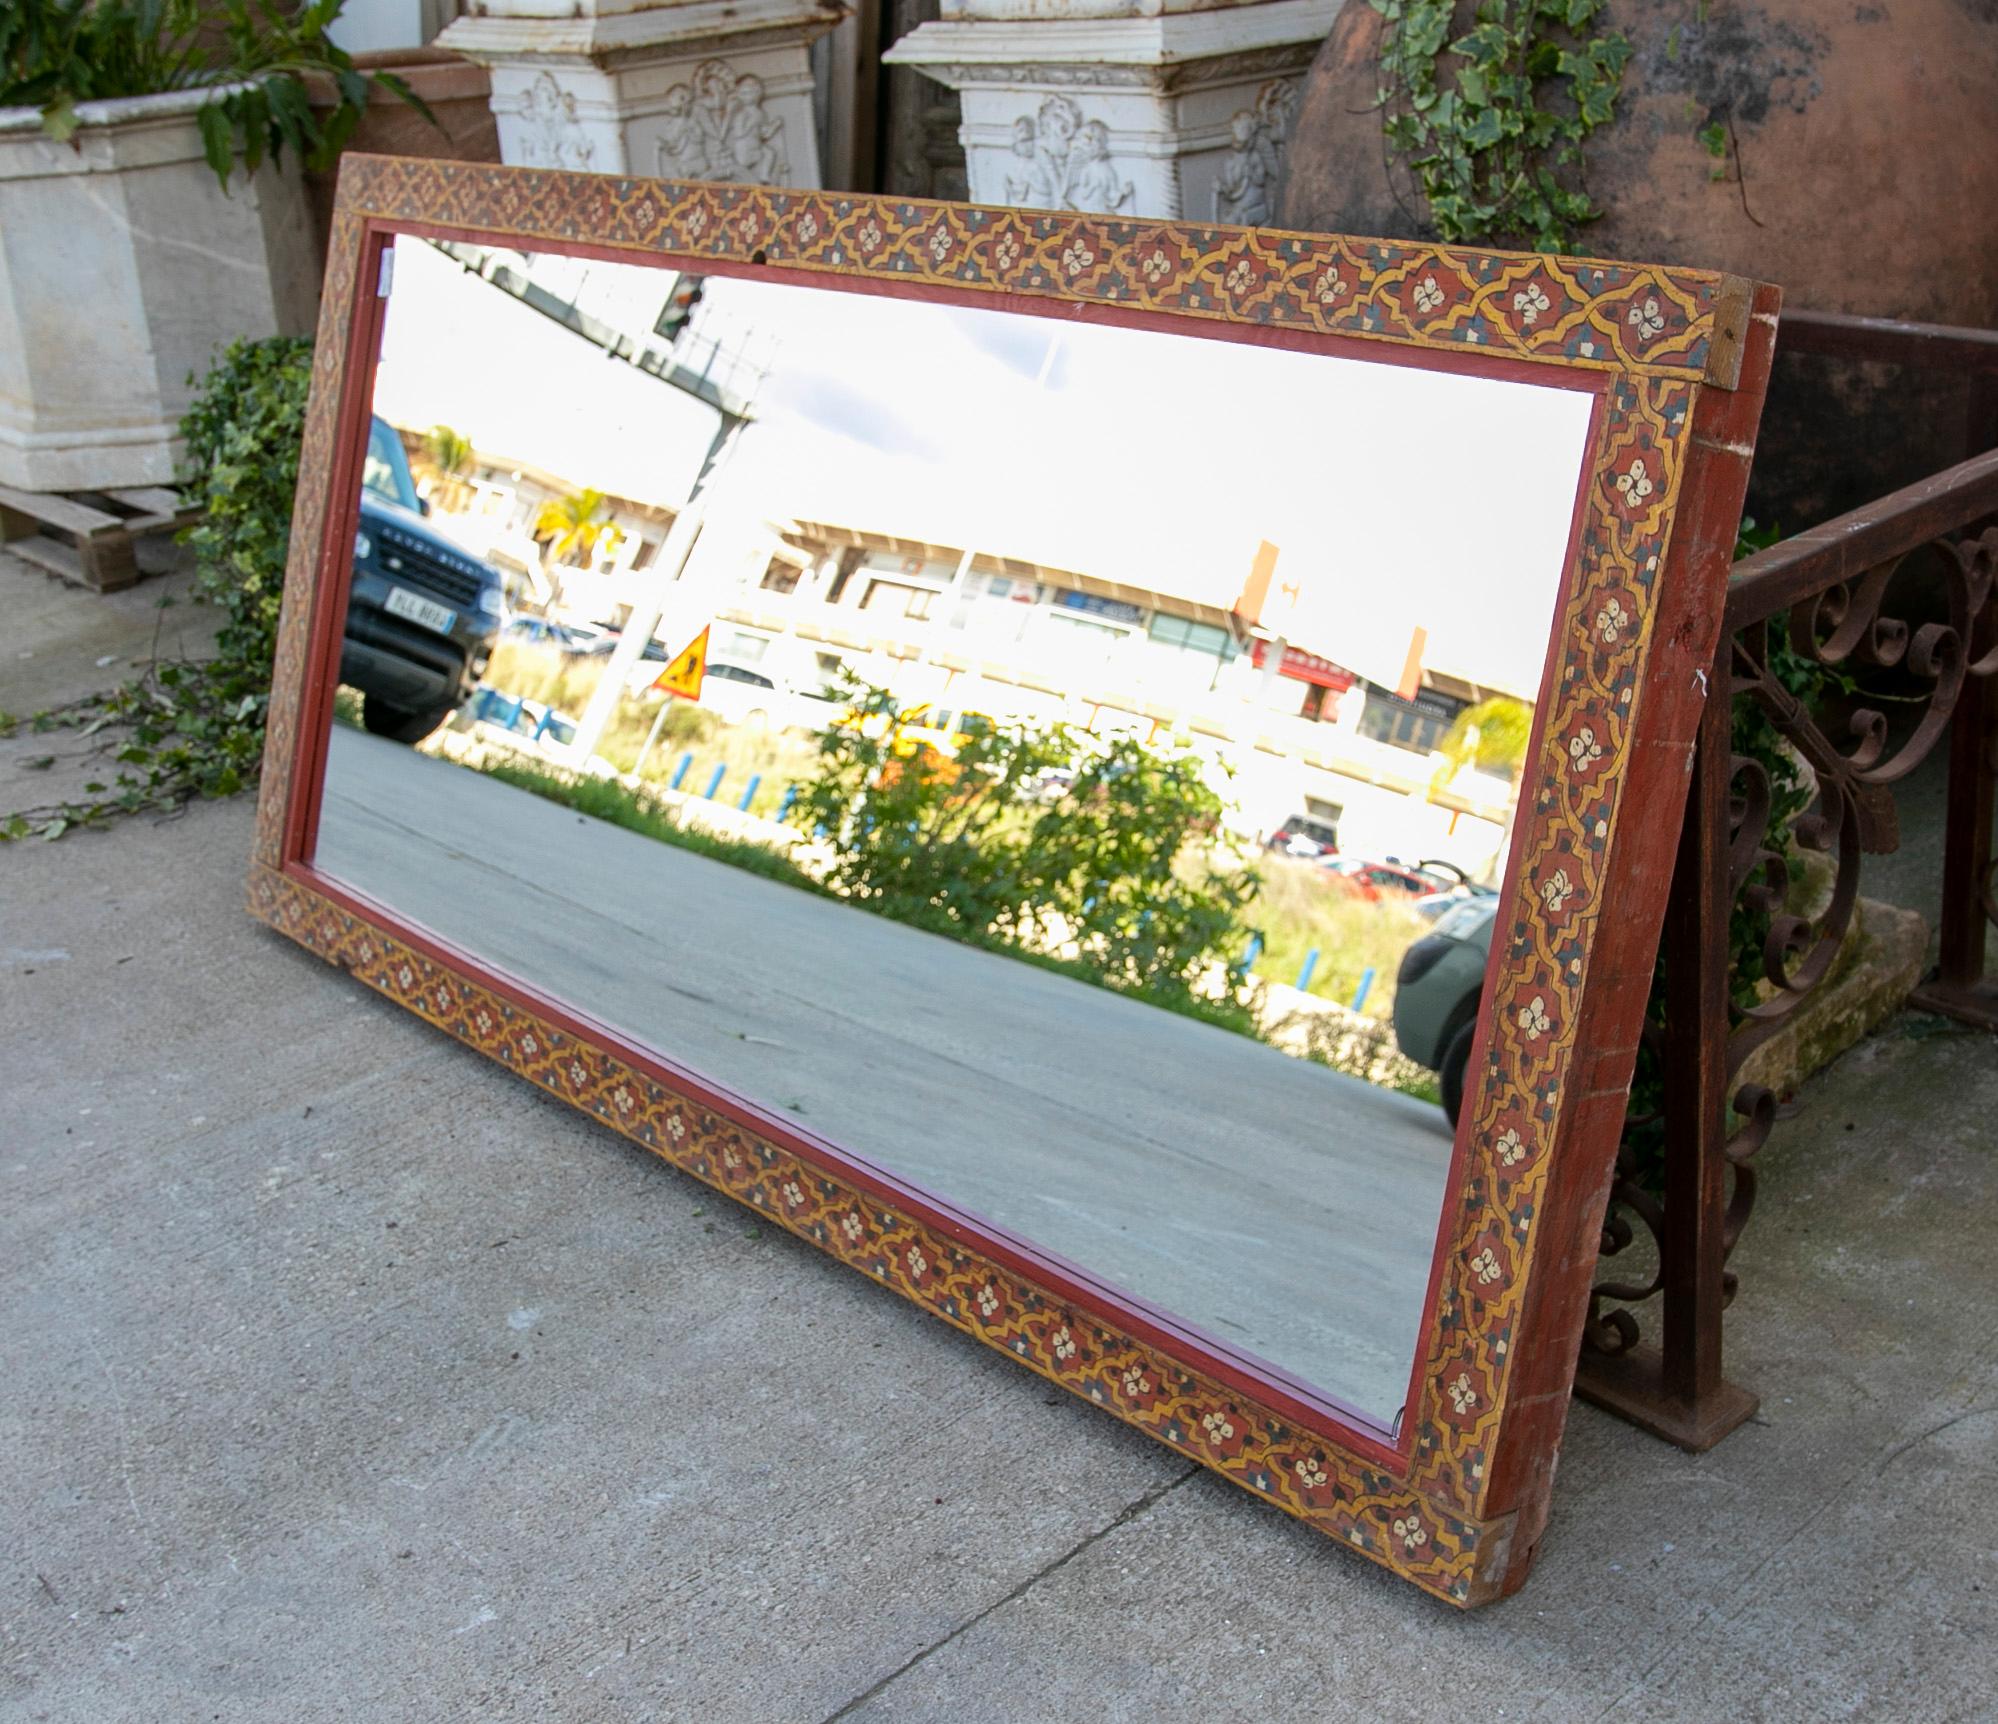 19th Century wall mirror with wooden frame made of polychrome panels.